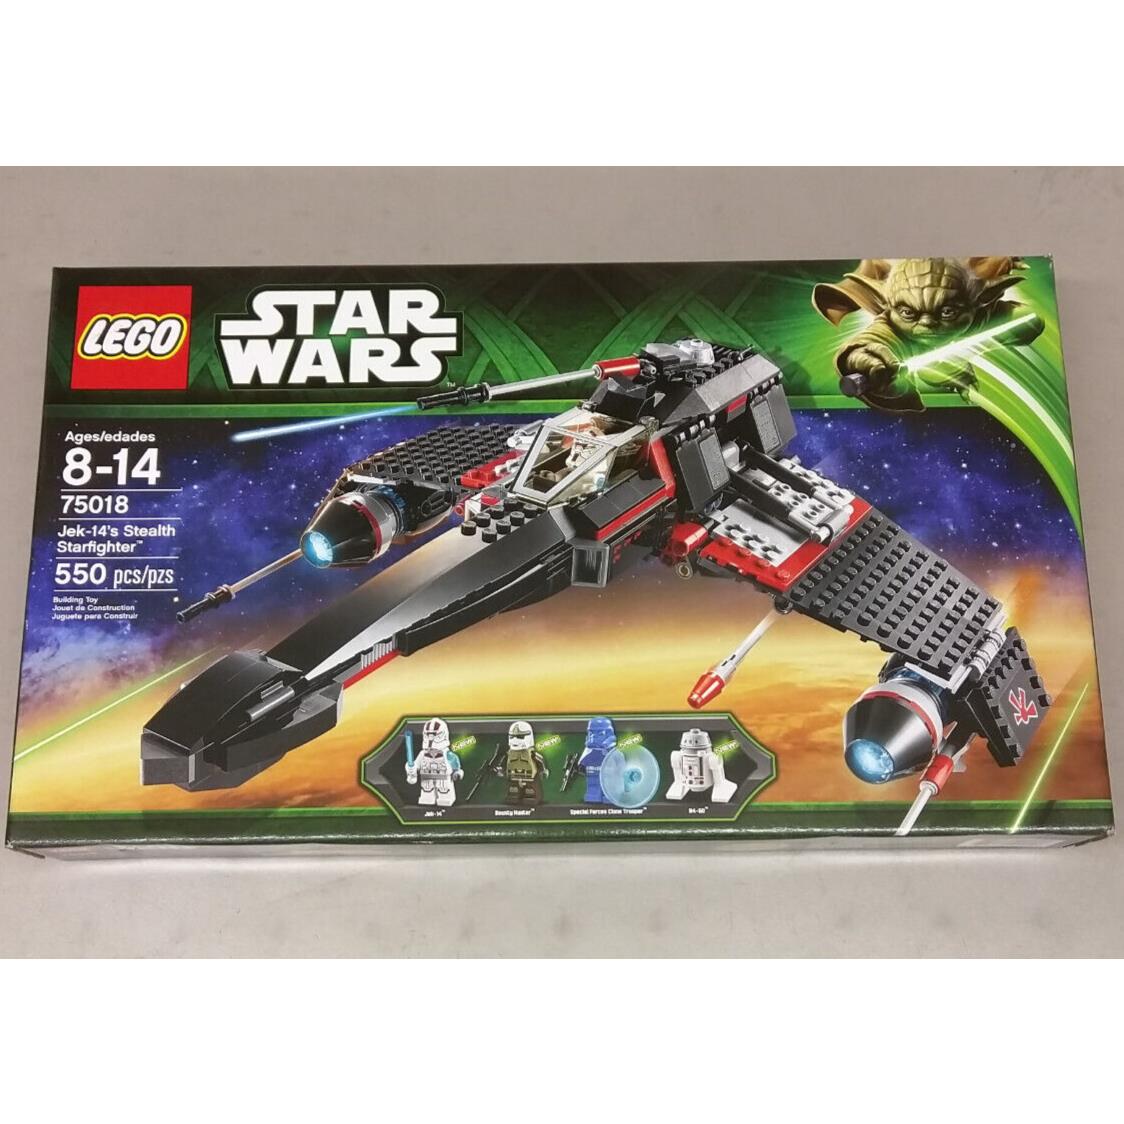 Lego Star Wars 75018 Jek-14`s Stealth Starfighter Special Forces R4-G0